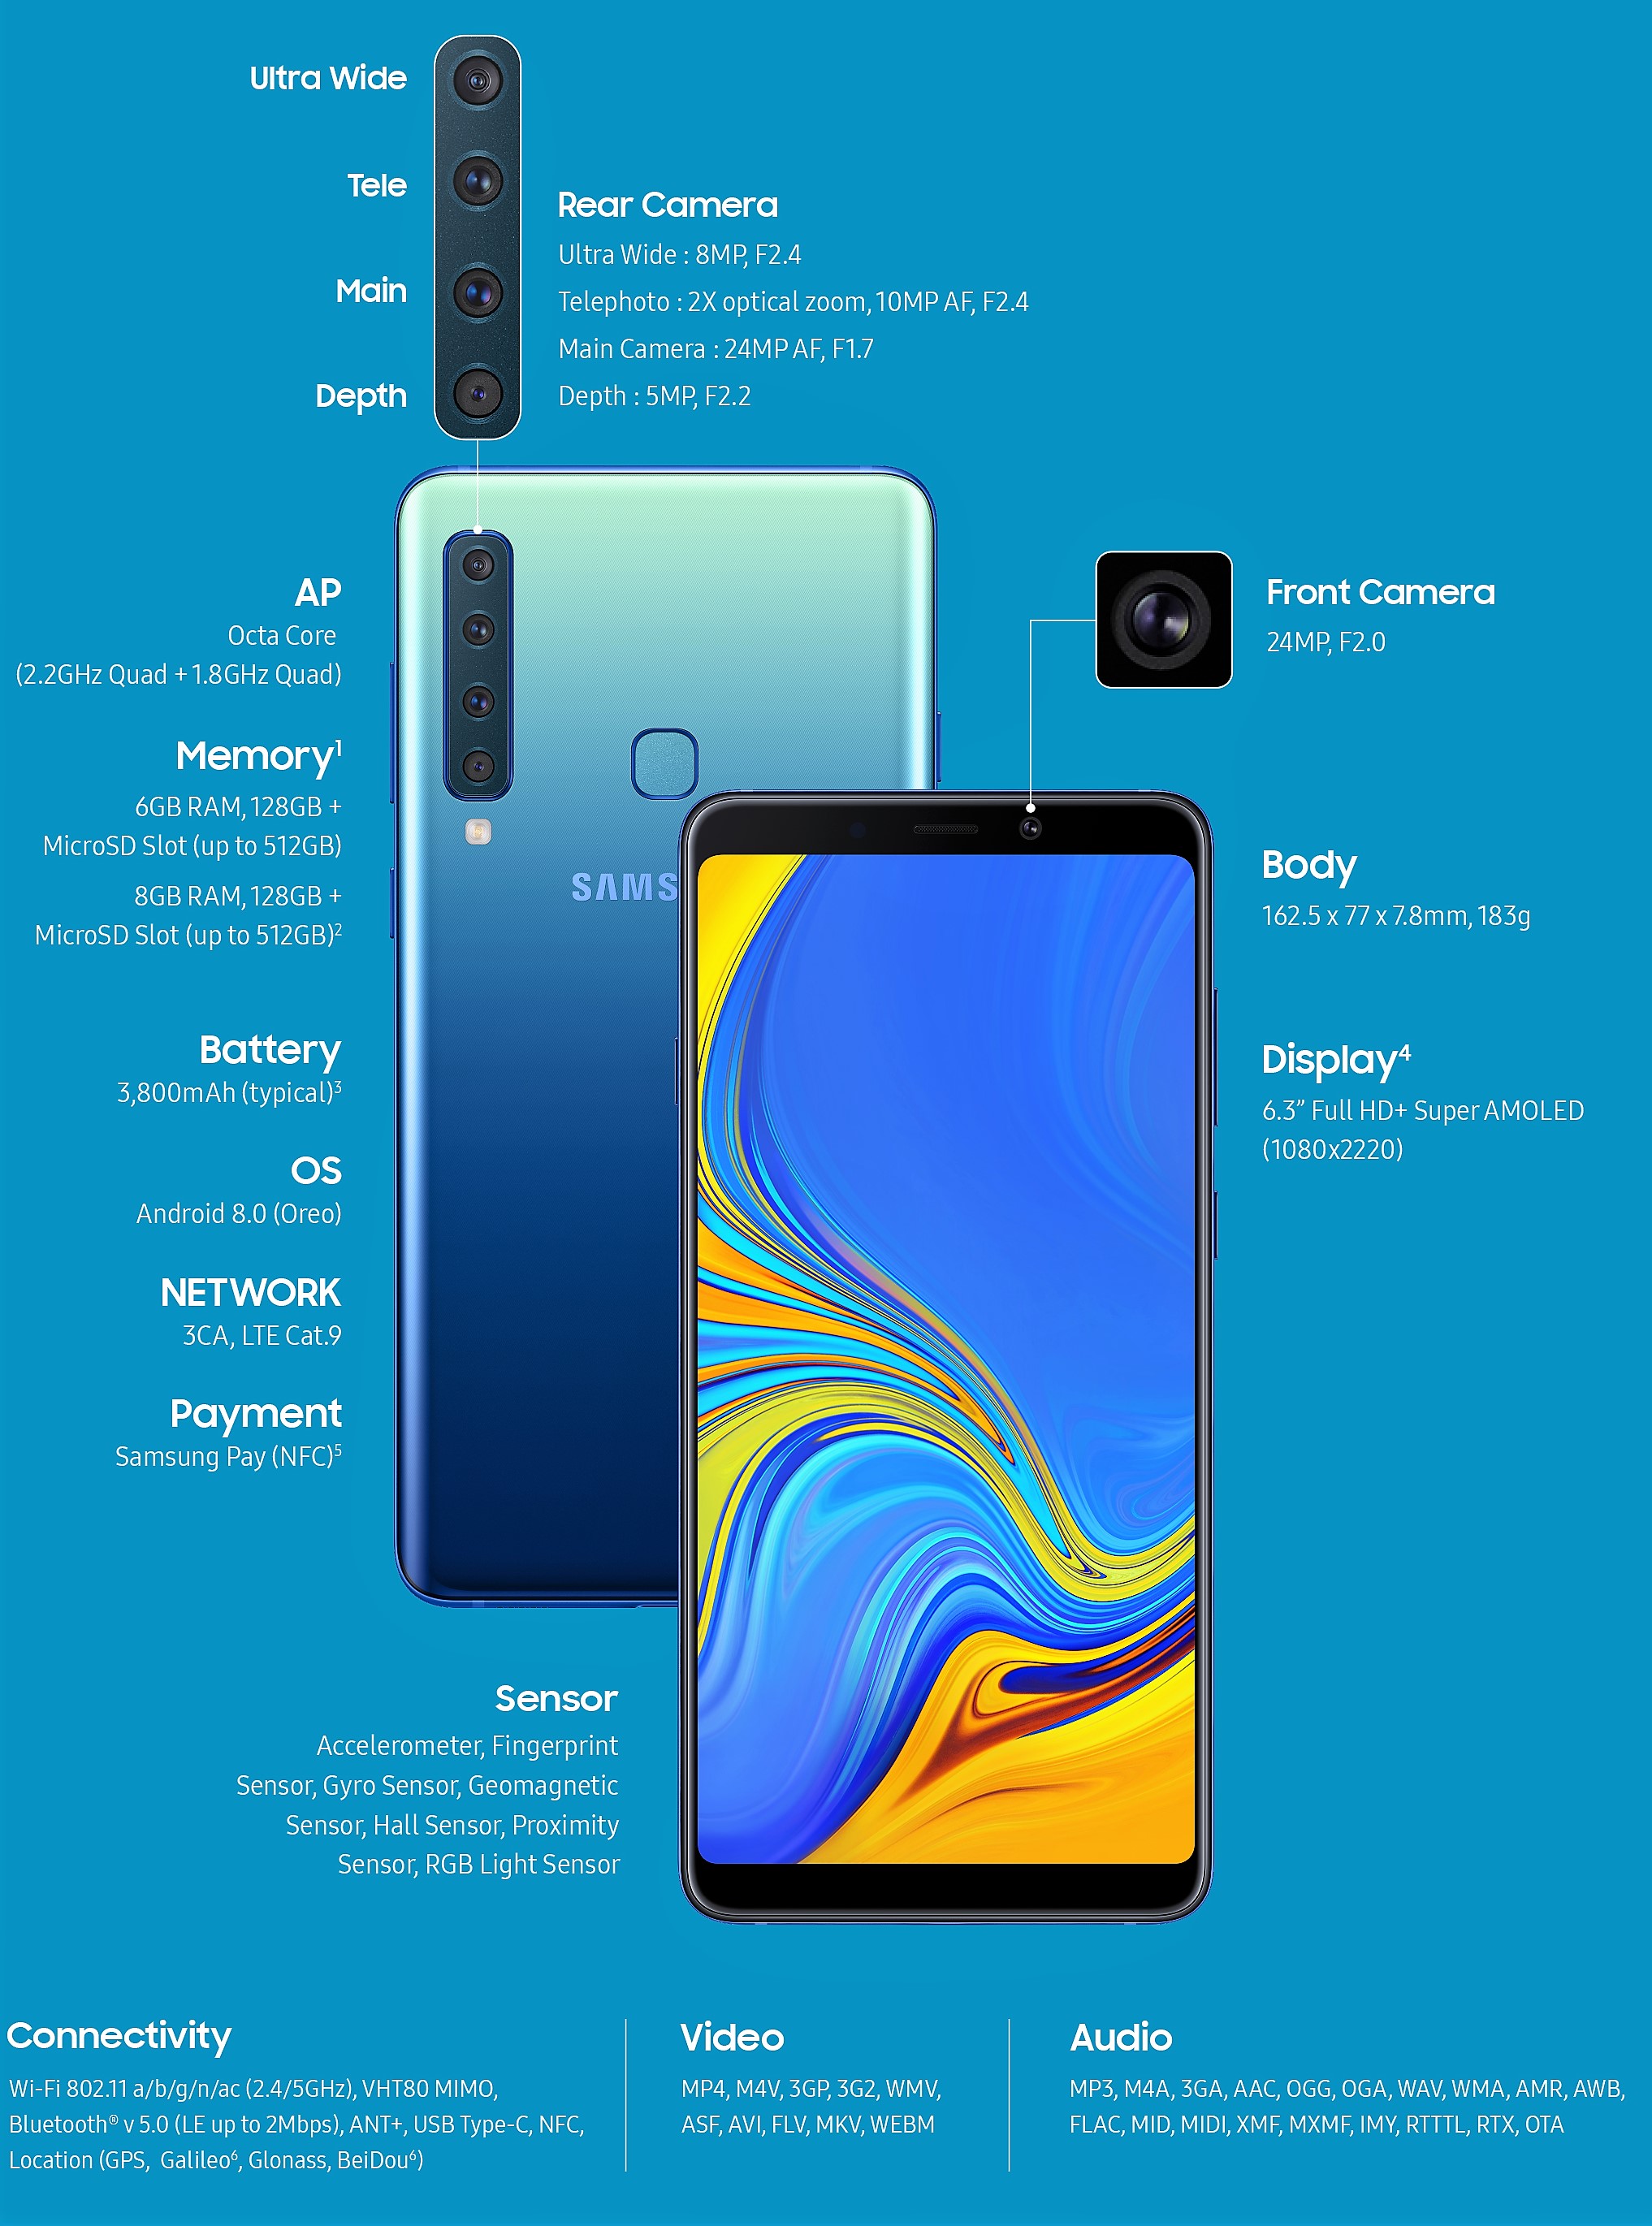 2019 Samsung Galaxy A9 Specifications